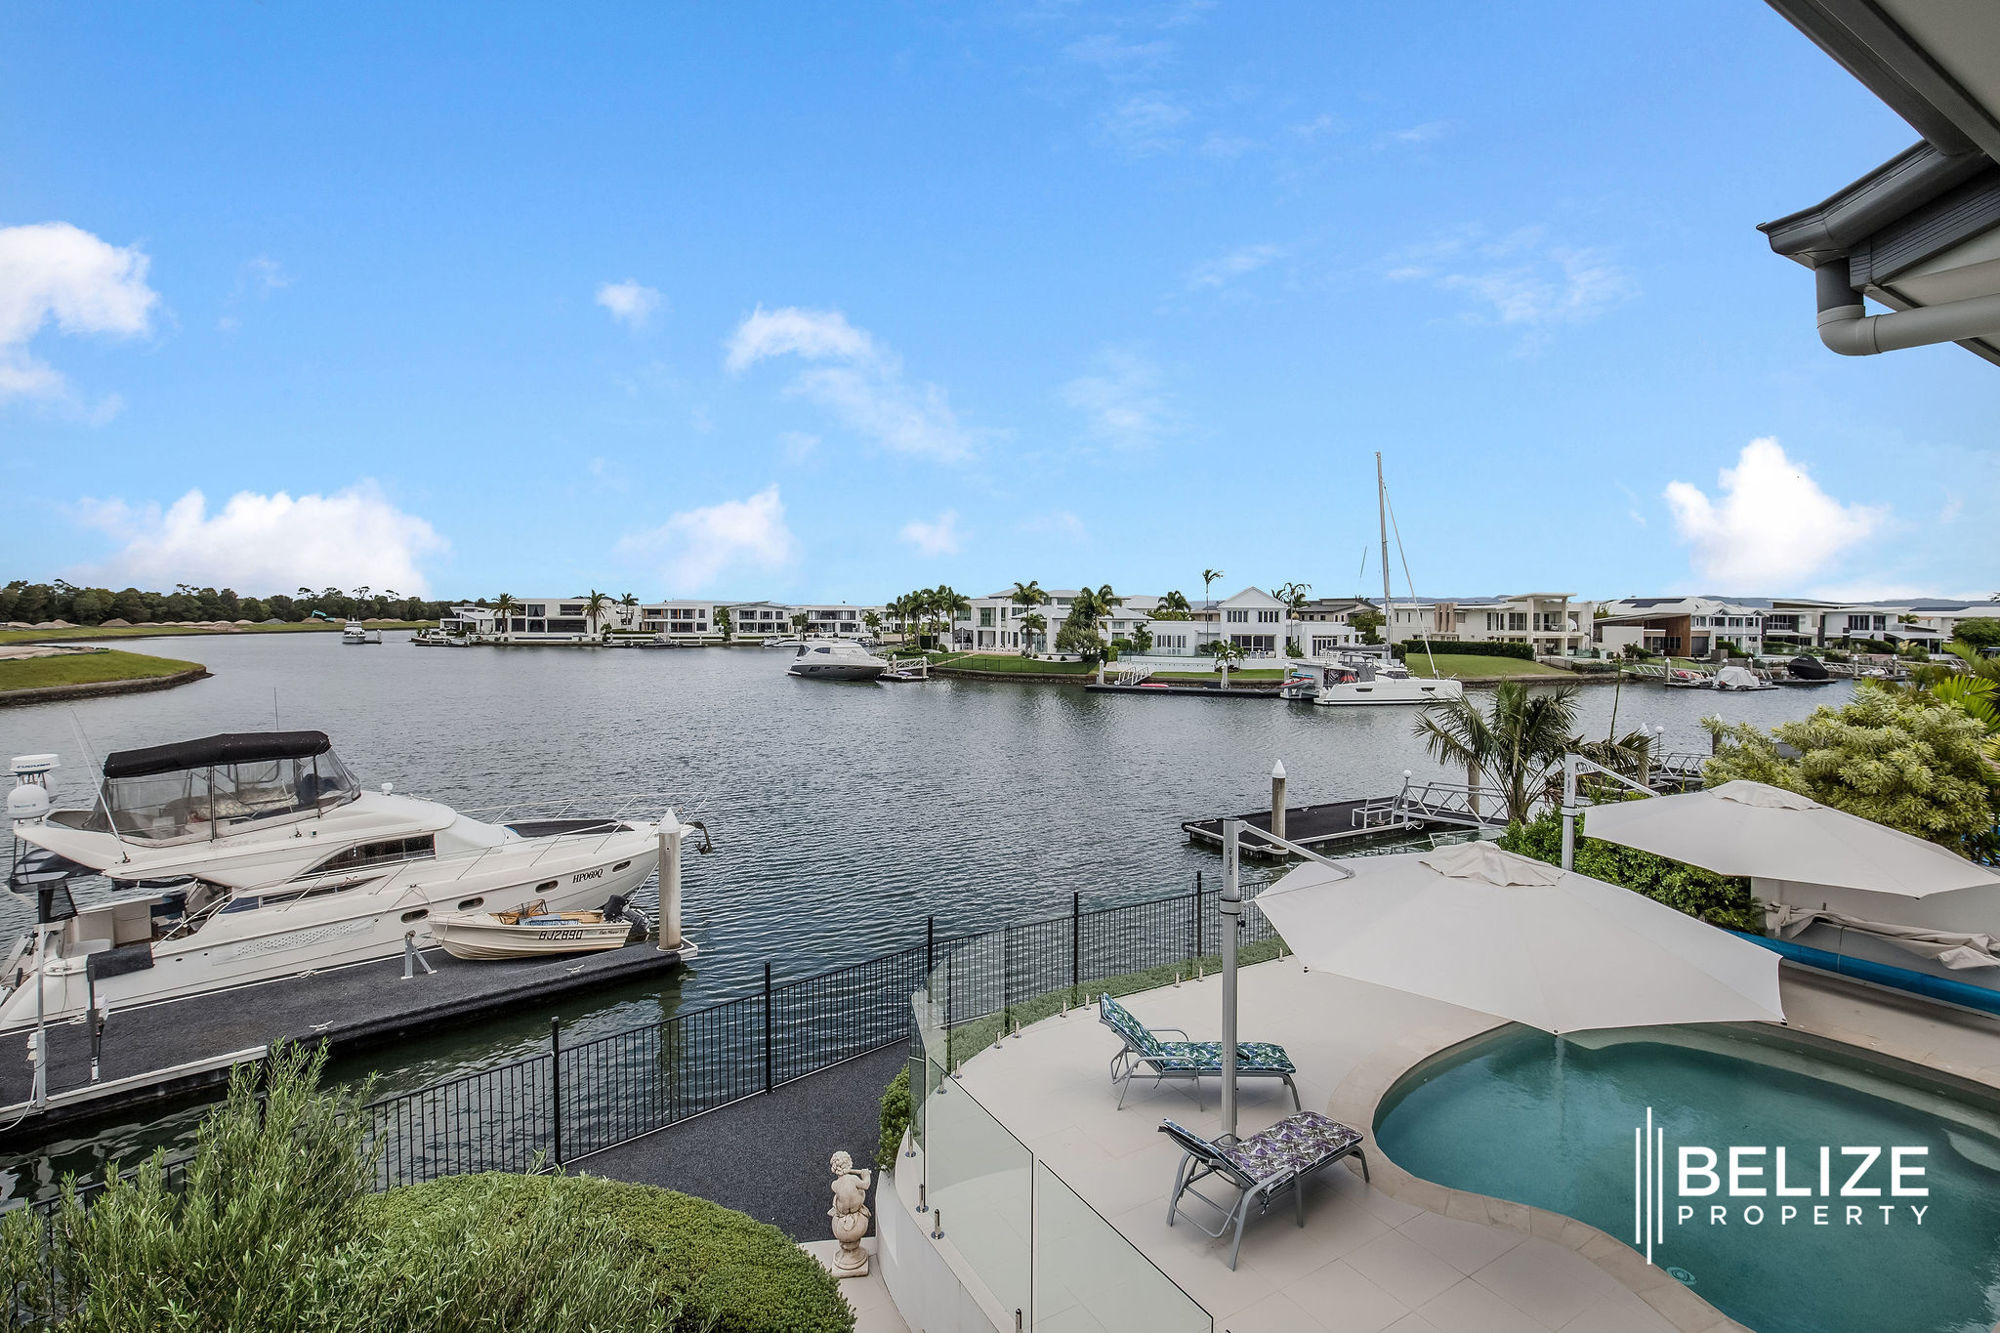 29M OF WATERFRONTAGE WITH ONE OF THE BEST OUTLOOKS IN CALYPSO BAY!